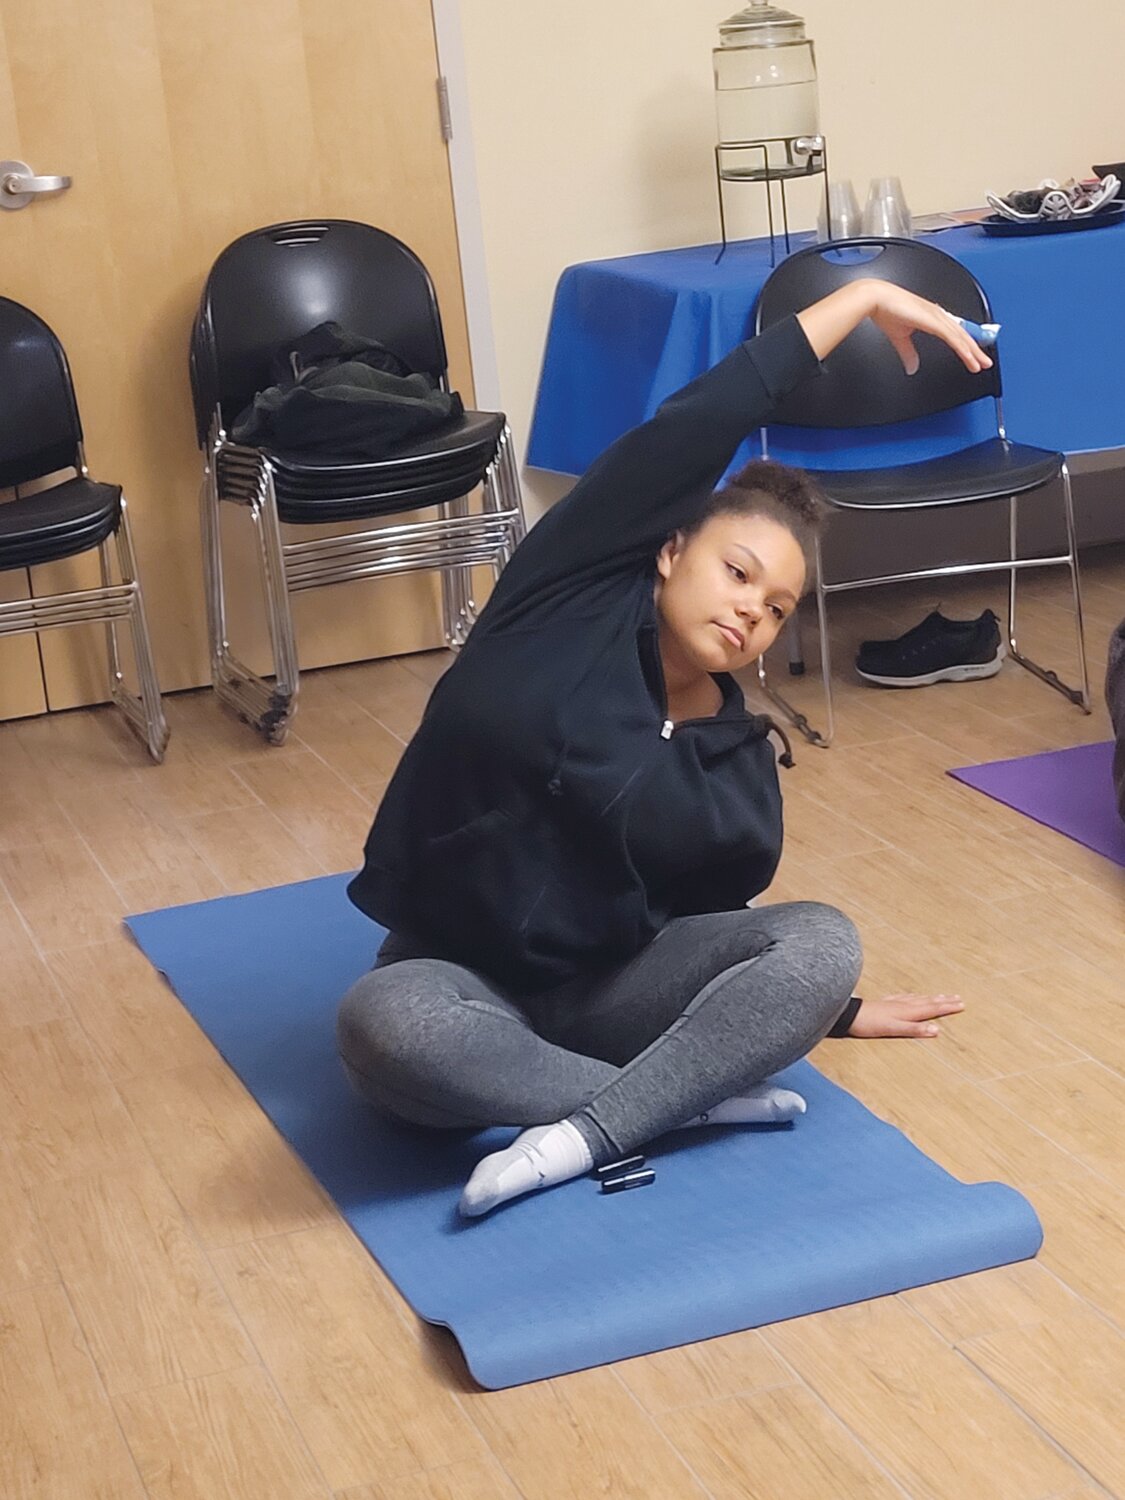 YOUNG YOGI: Johnston High School senior Jenna Asselin designed a 10-week yoga course as part of her senior project. She hopes to share the calming habits of yoga 
with her fellow students, who seem to be 
suffering from anxiety
more than ever.